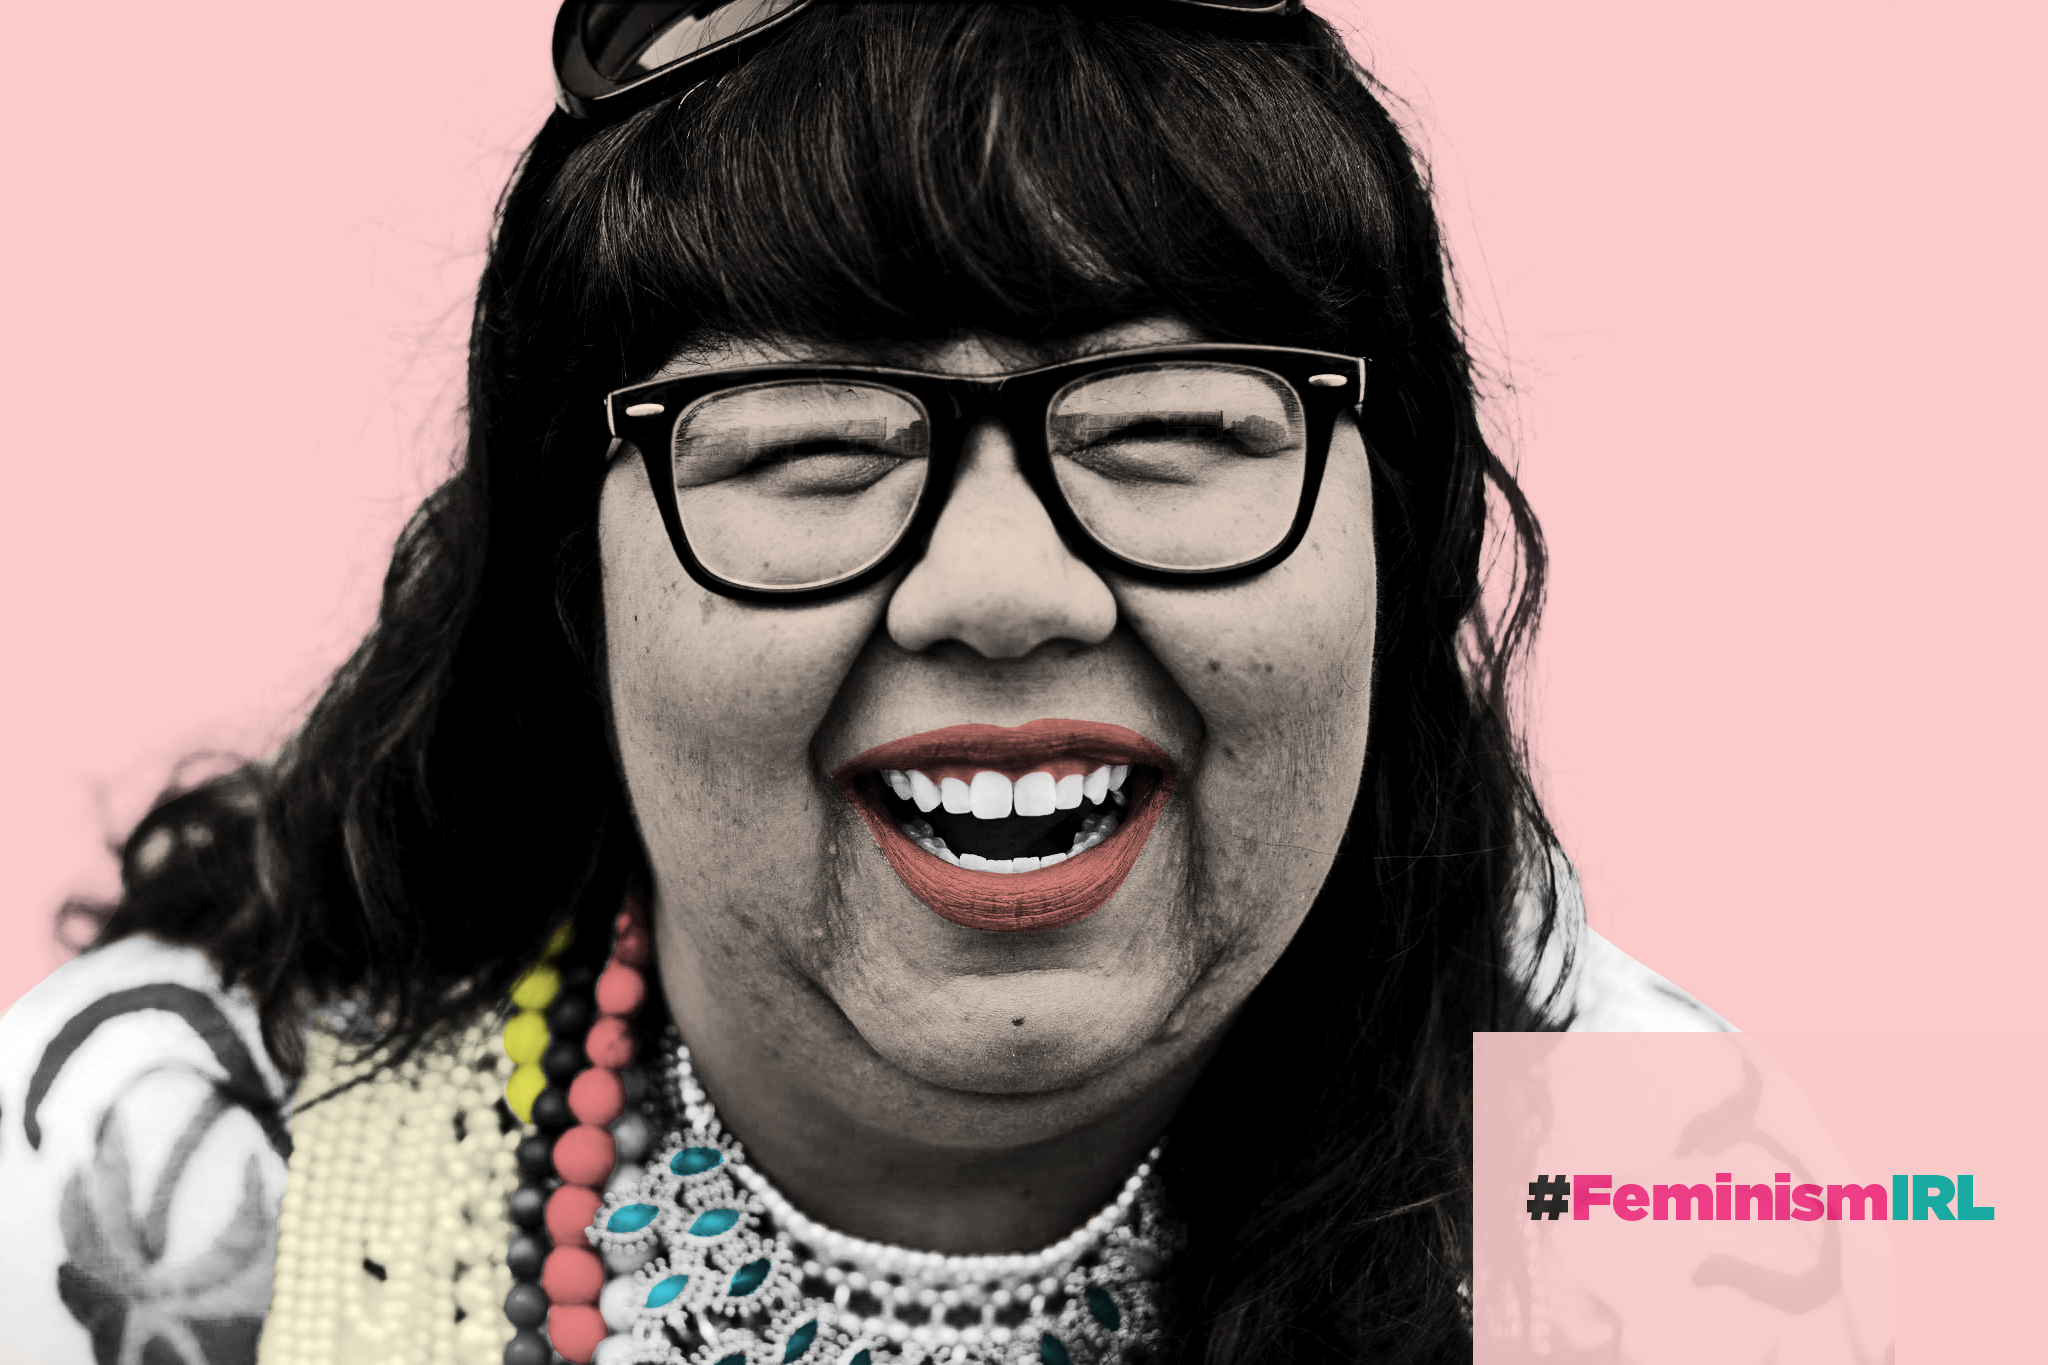 1. "Fat Acceptance and Body Positivity in the Feminist Movement" - wide 6